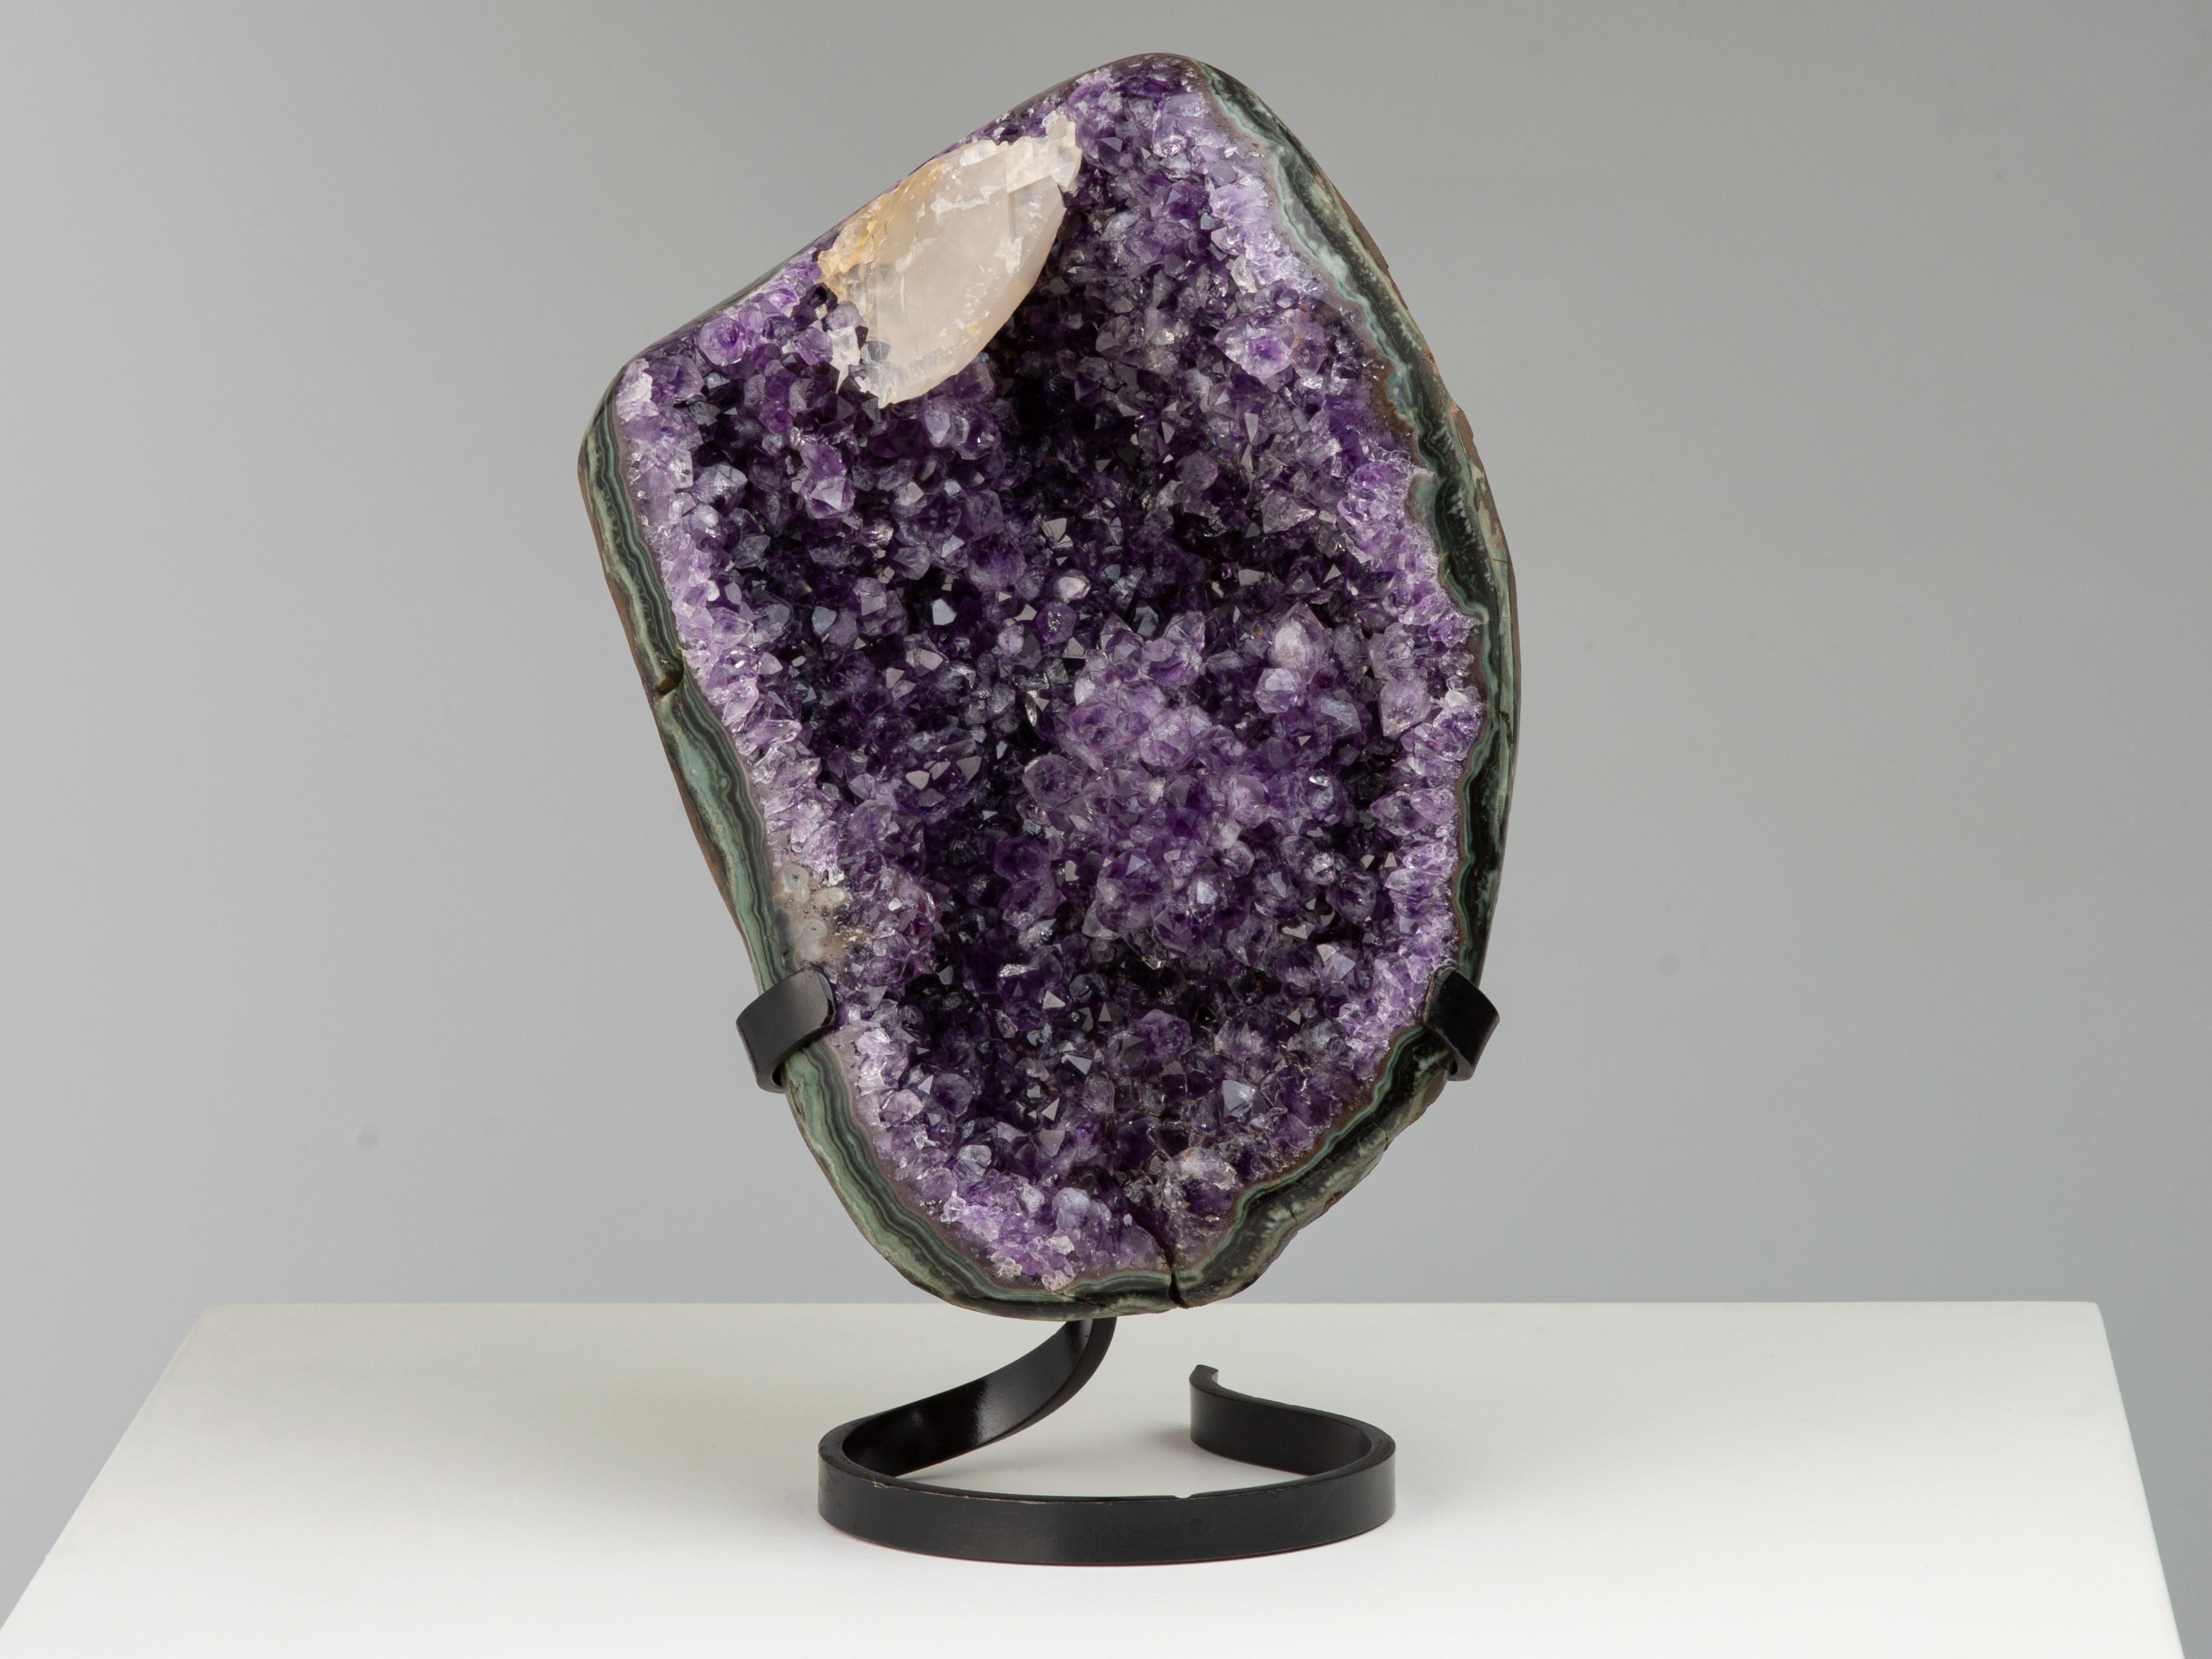 An interesting and stunning amethyst cluster with a striking mineral and colour mix. 

In this aesthetic piece the edges have been polished to reveal layers of a vibrant green celadonite, blue-grey agate and white quartz, which frame the intense